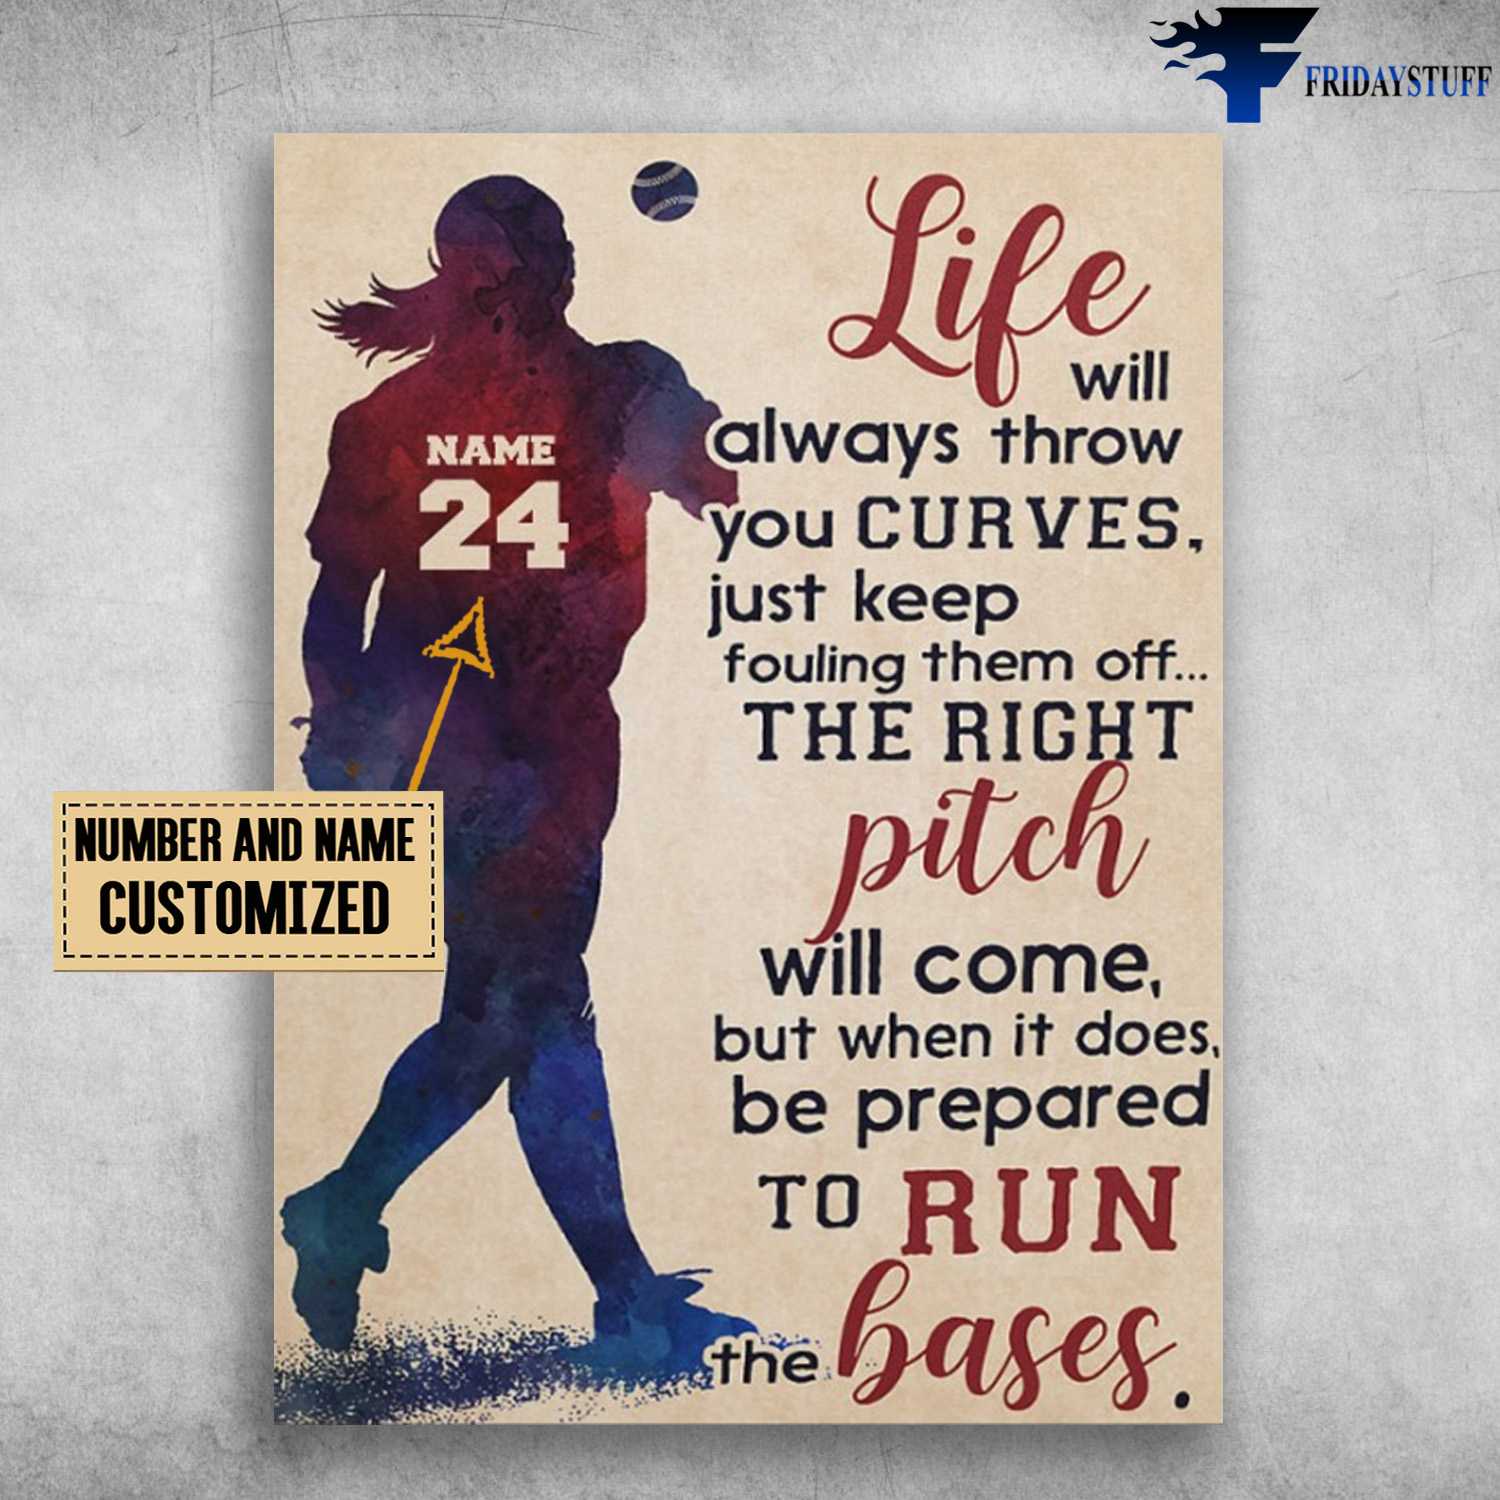 Baseball Lover, Baseabll Decor, Life Will Always Throw You Curves, Just Keep Fouling Them Odd, The Right Pitch Will Come, But When It Does, Be Prepared To Run The Bases